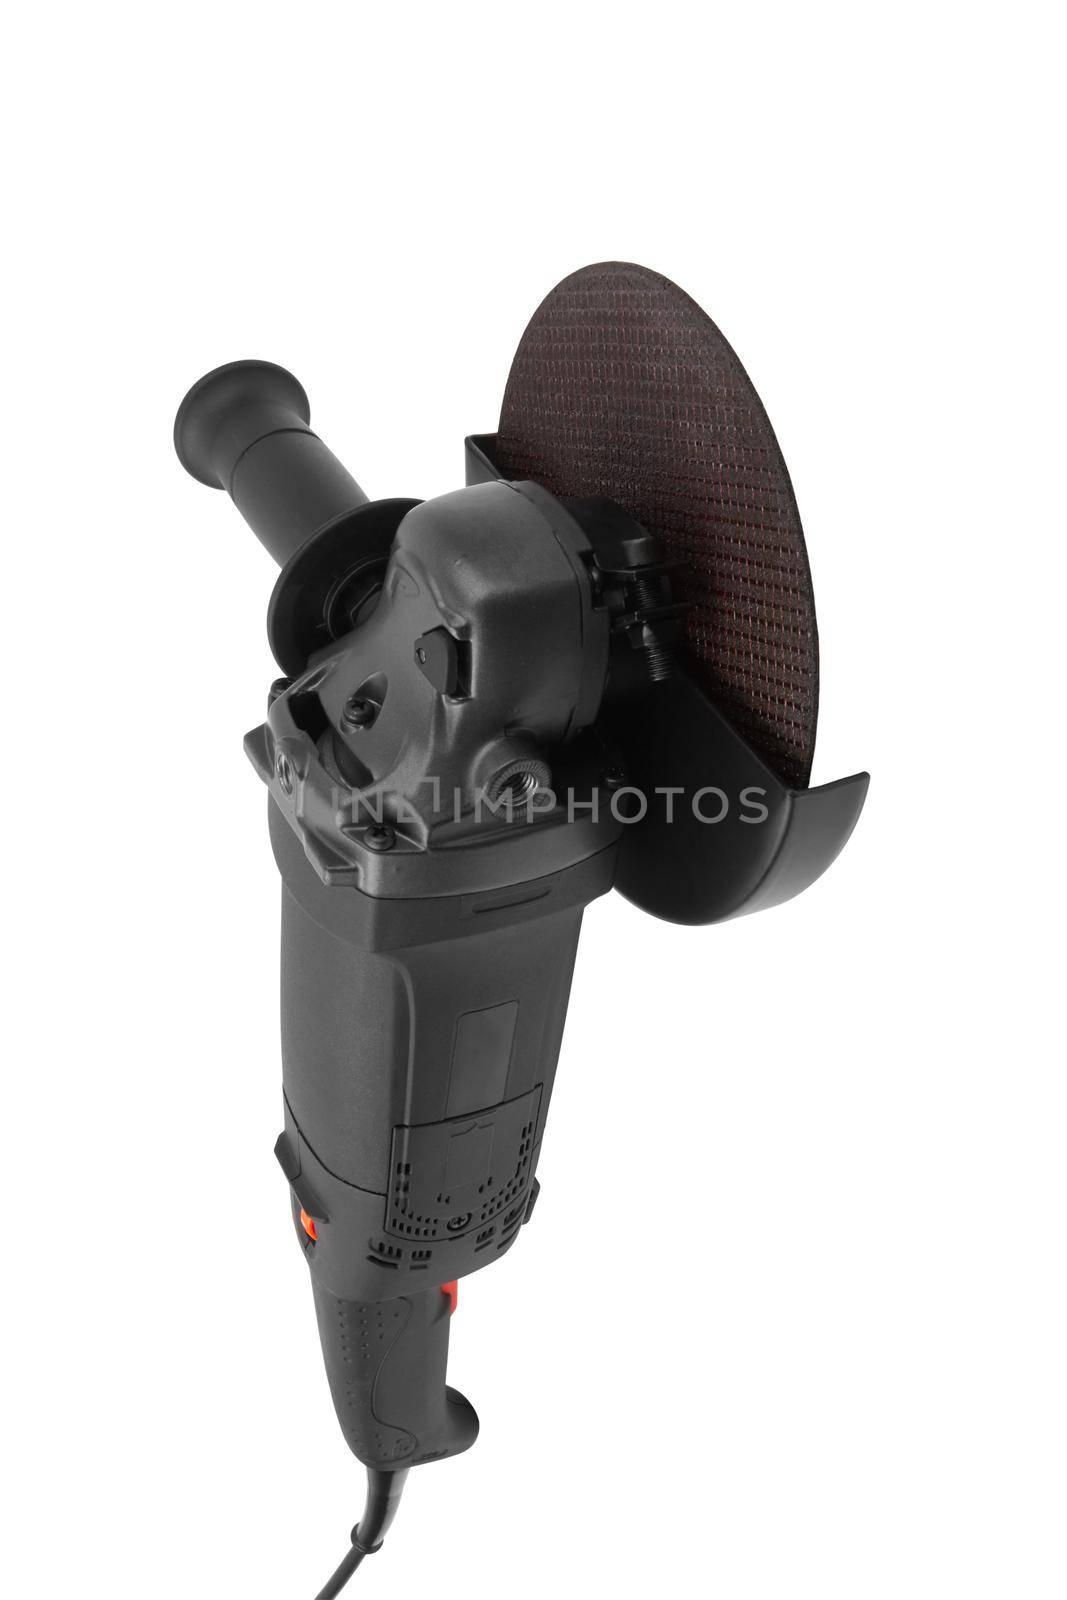 Angle grinder tool isolated on a white background